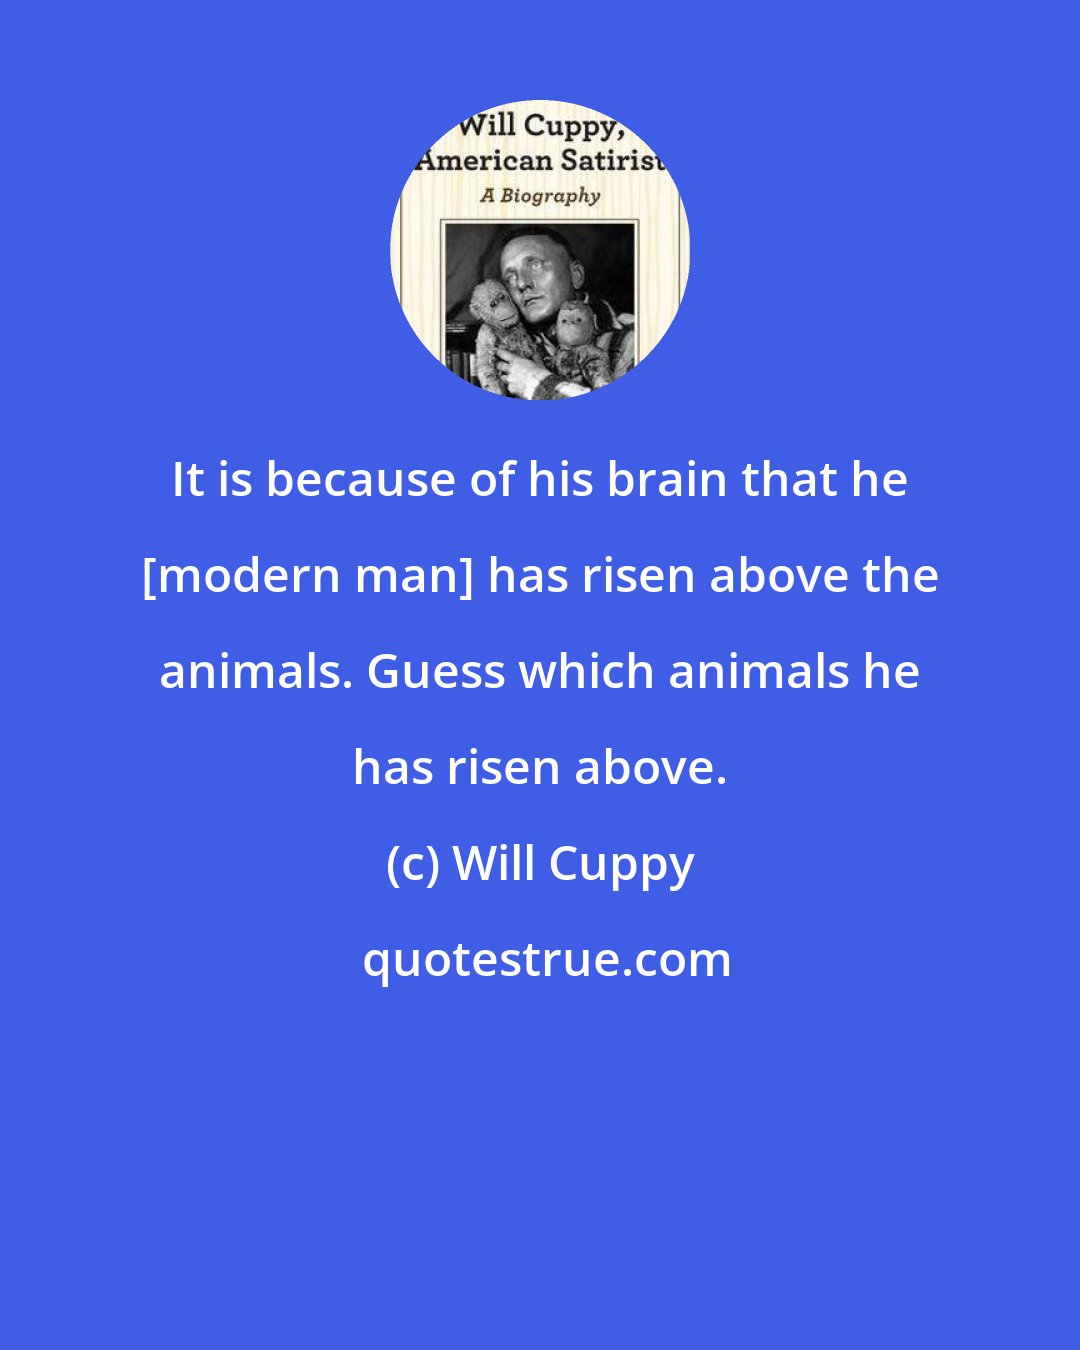 Will Cuppy: It is because of his brain that he [modern man] has risen above the animals. Guess which animals he has risen above.